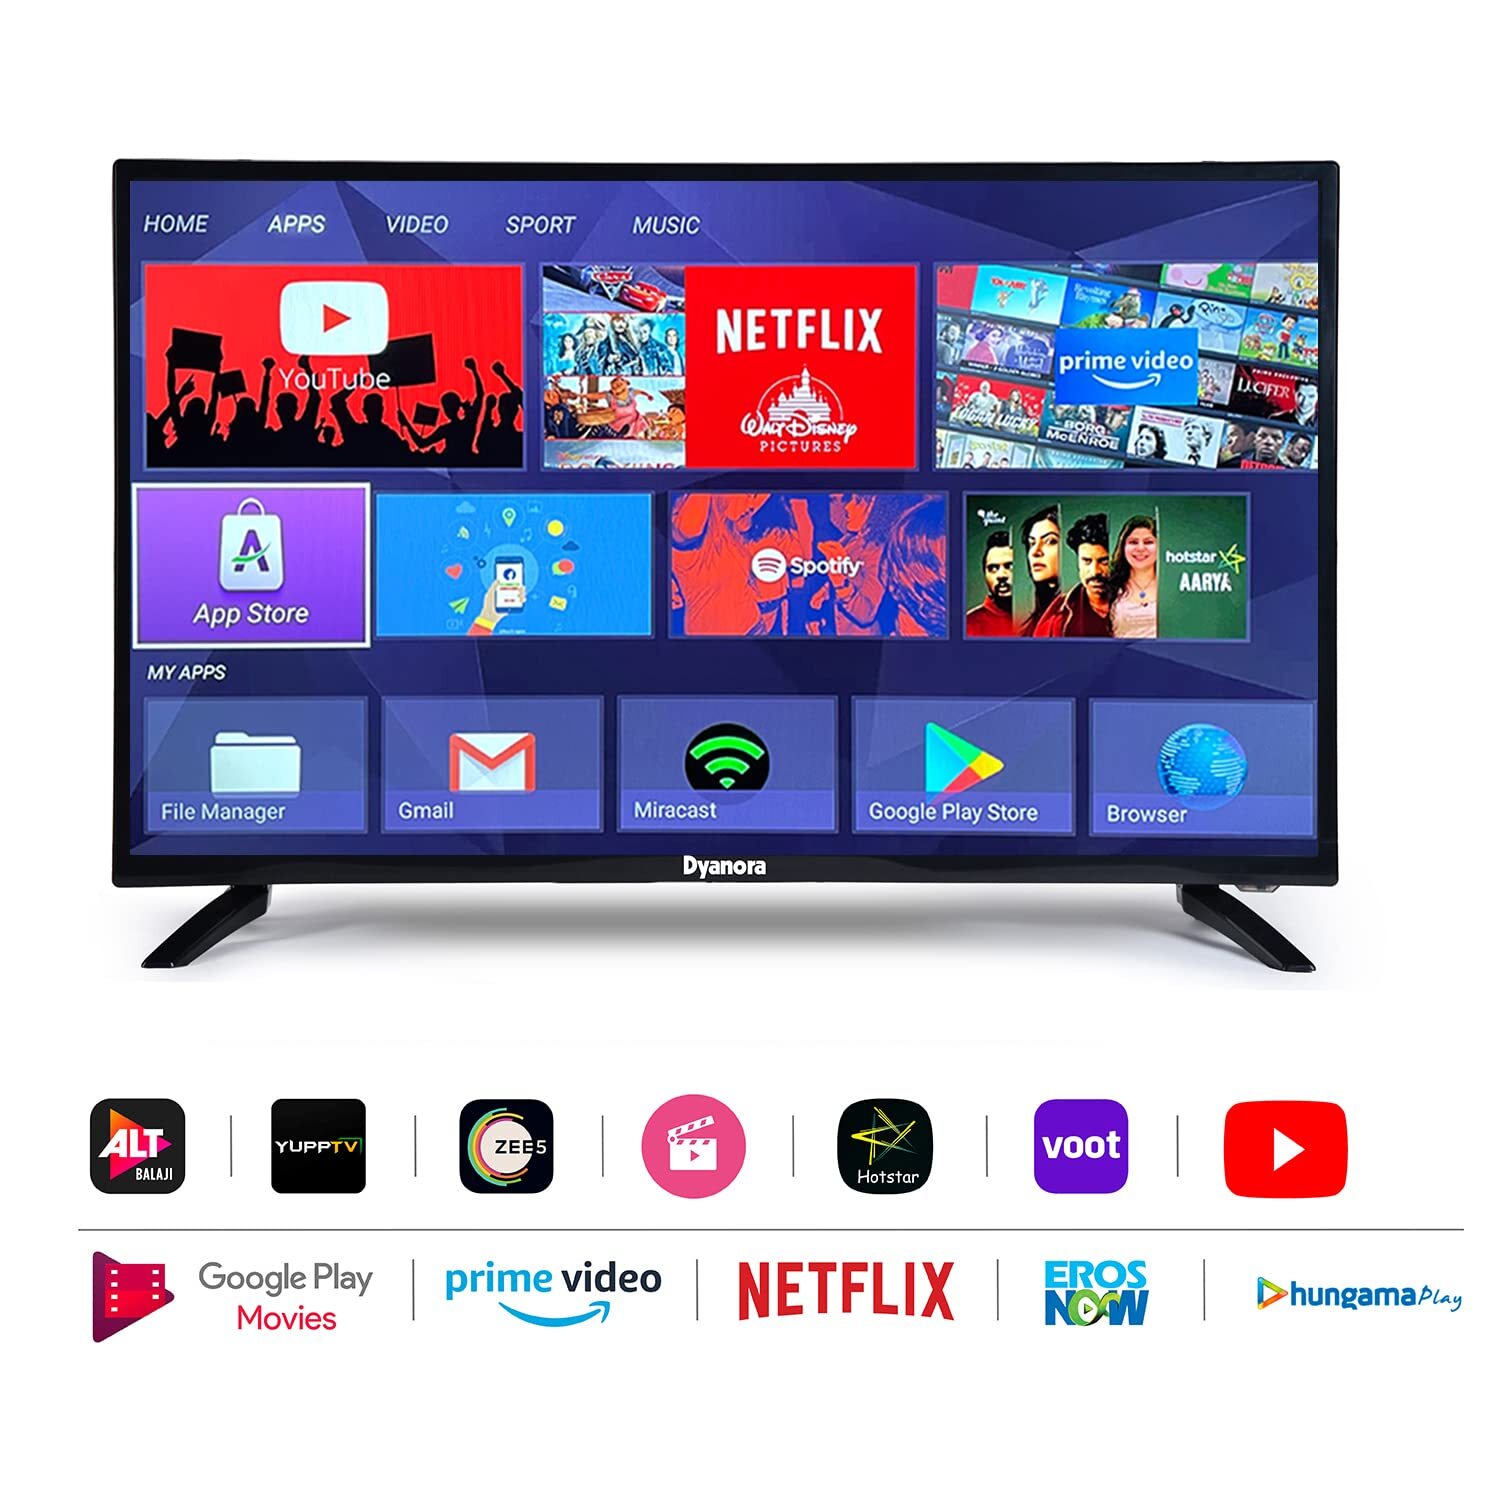 Dyanora 80 cm (32 inch) HD Ready LED Smart Android TV (DY-LD32H0S)